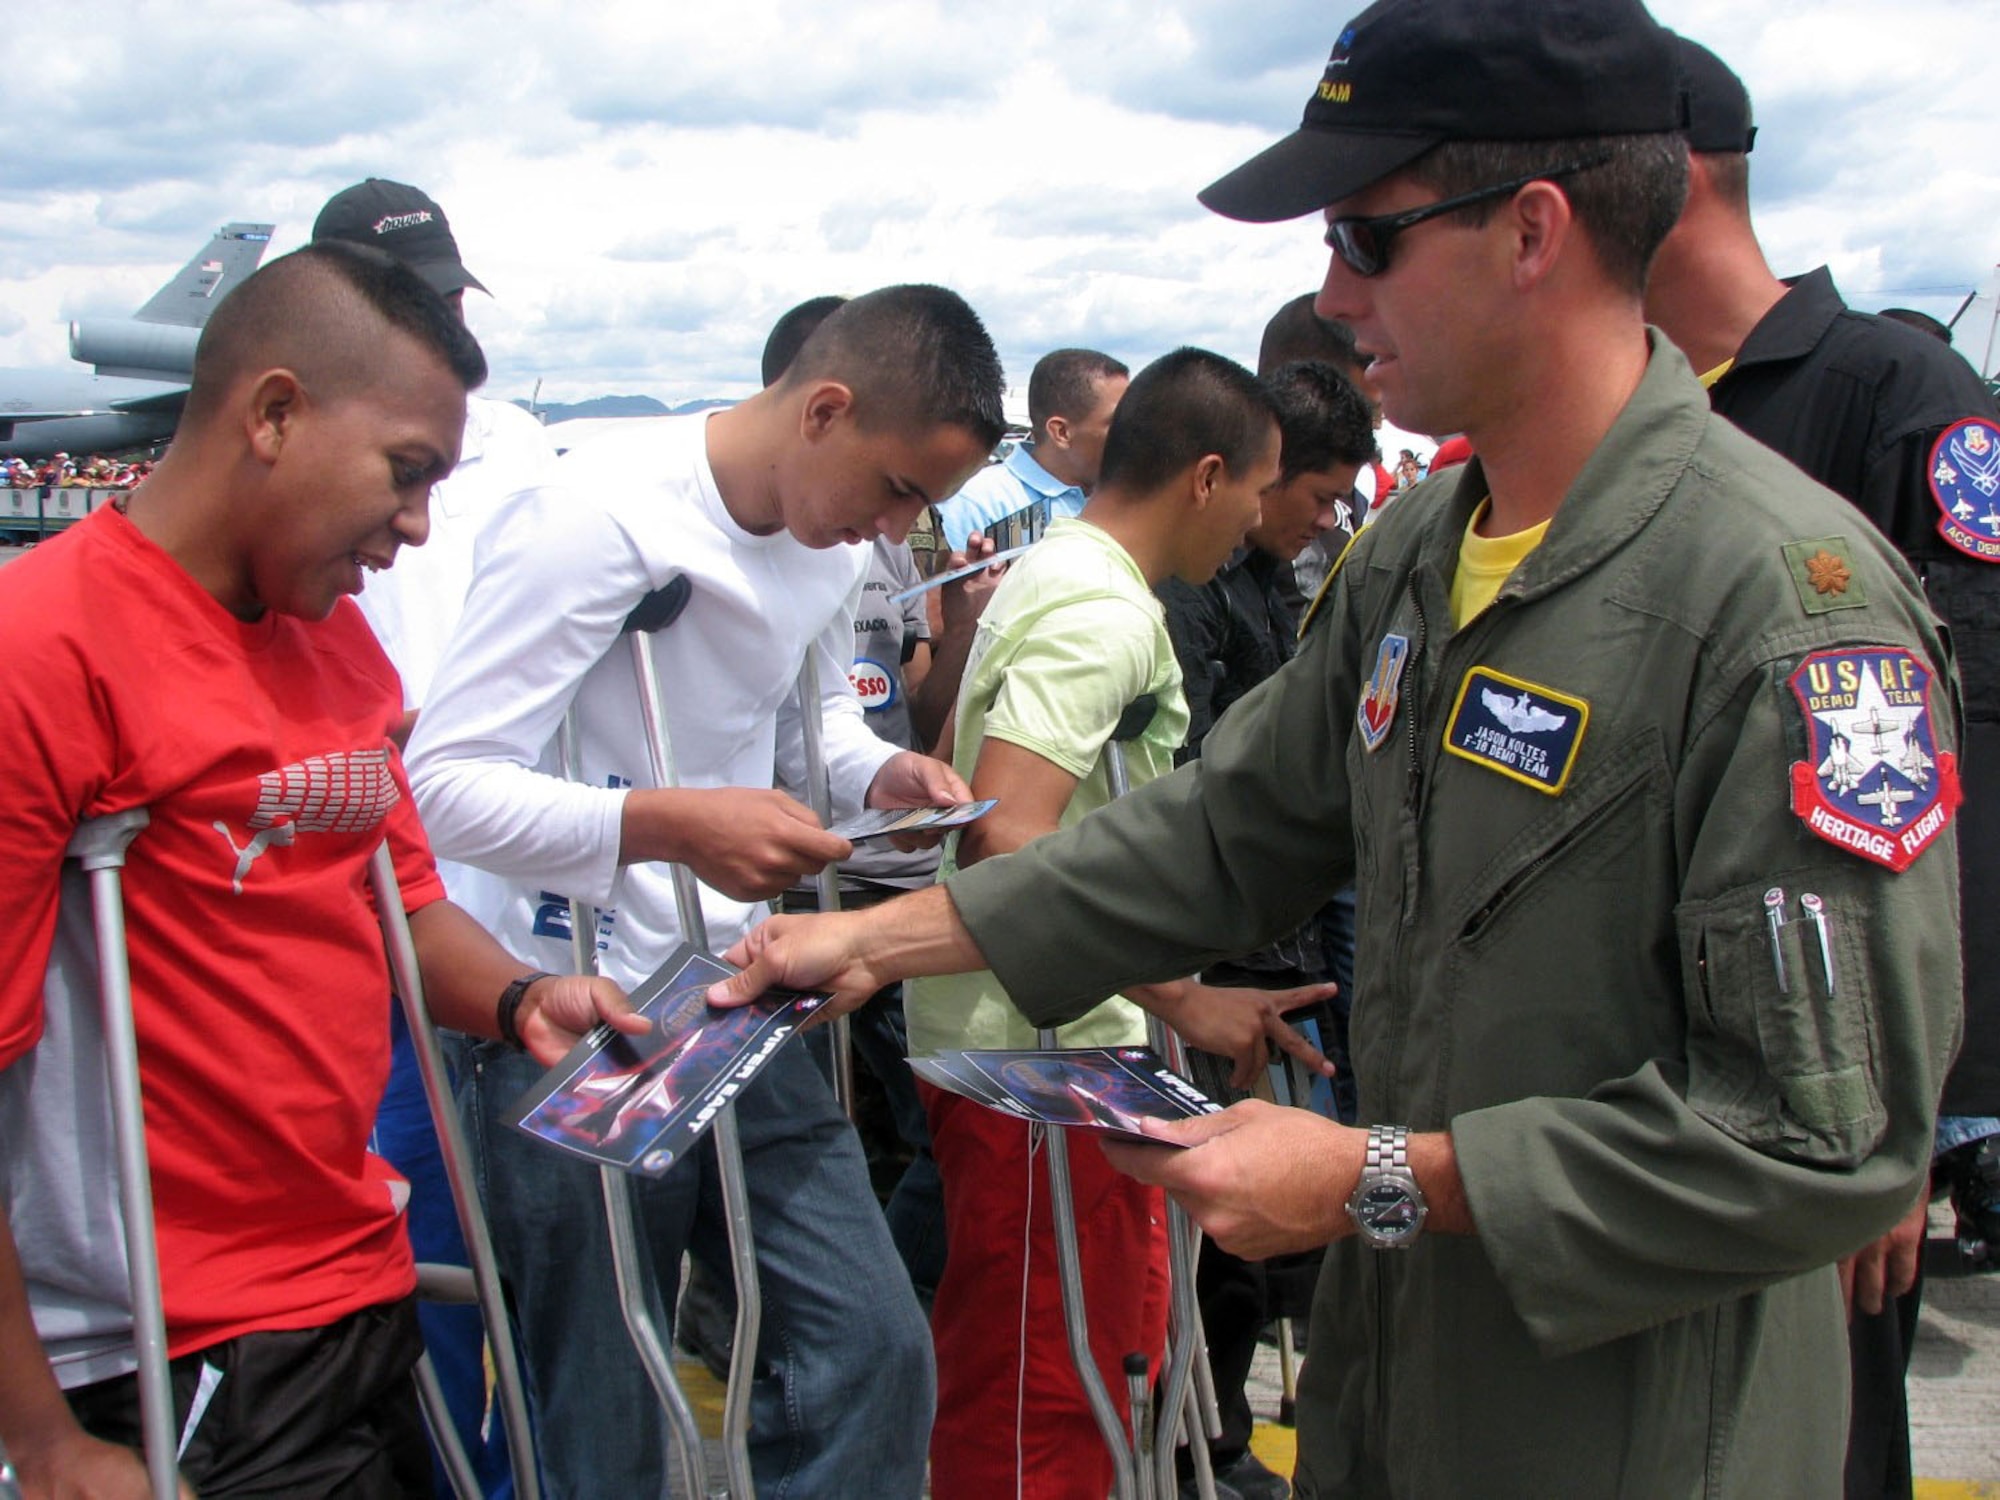 Maj. Jason Koltes hands out mementos to injured Columbian military veterans on Sunday, July 2. Major Koltes is the commander and a pilot for the F-16 Fighting Falcon Viper East aerial demonstration team. The team was in Colombia for the Rio Negro air show. (U.S. Air Force photo/1st Lt. Christina Mundy) 
